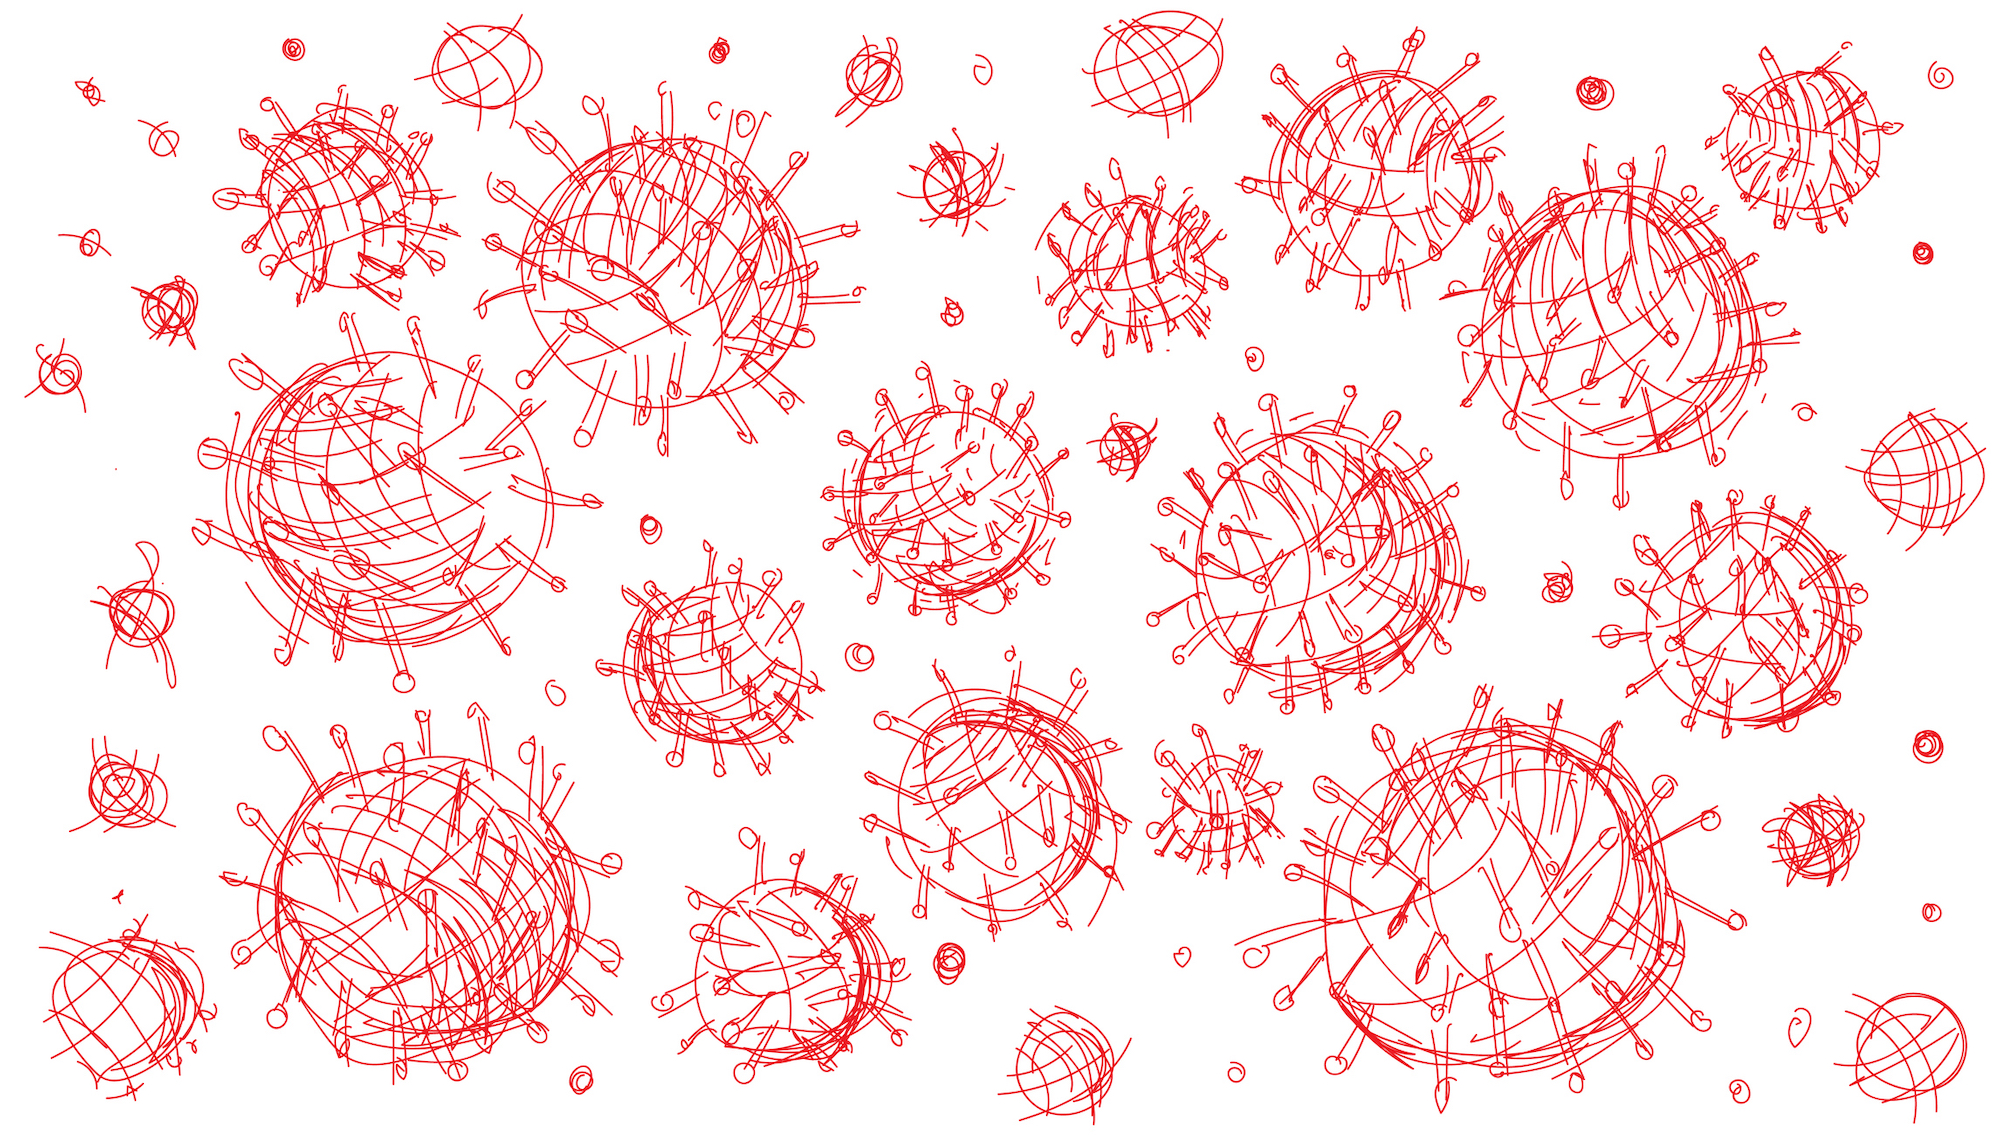 Illustration of COVID-19, made by drawing in red circular orbs with match-like objects sticking out around all of them.